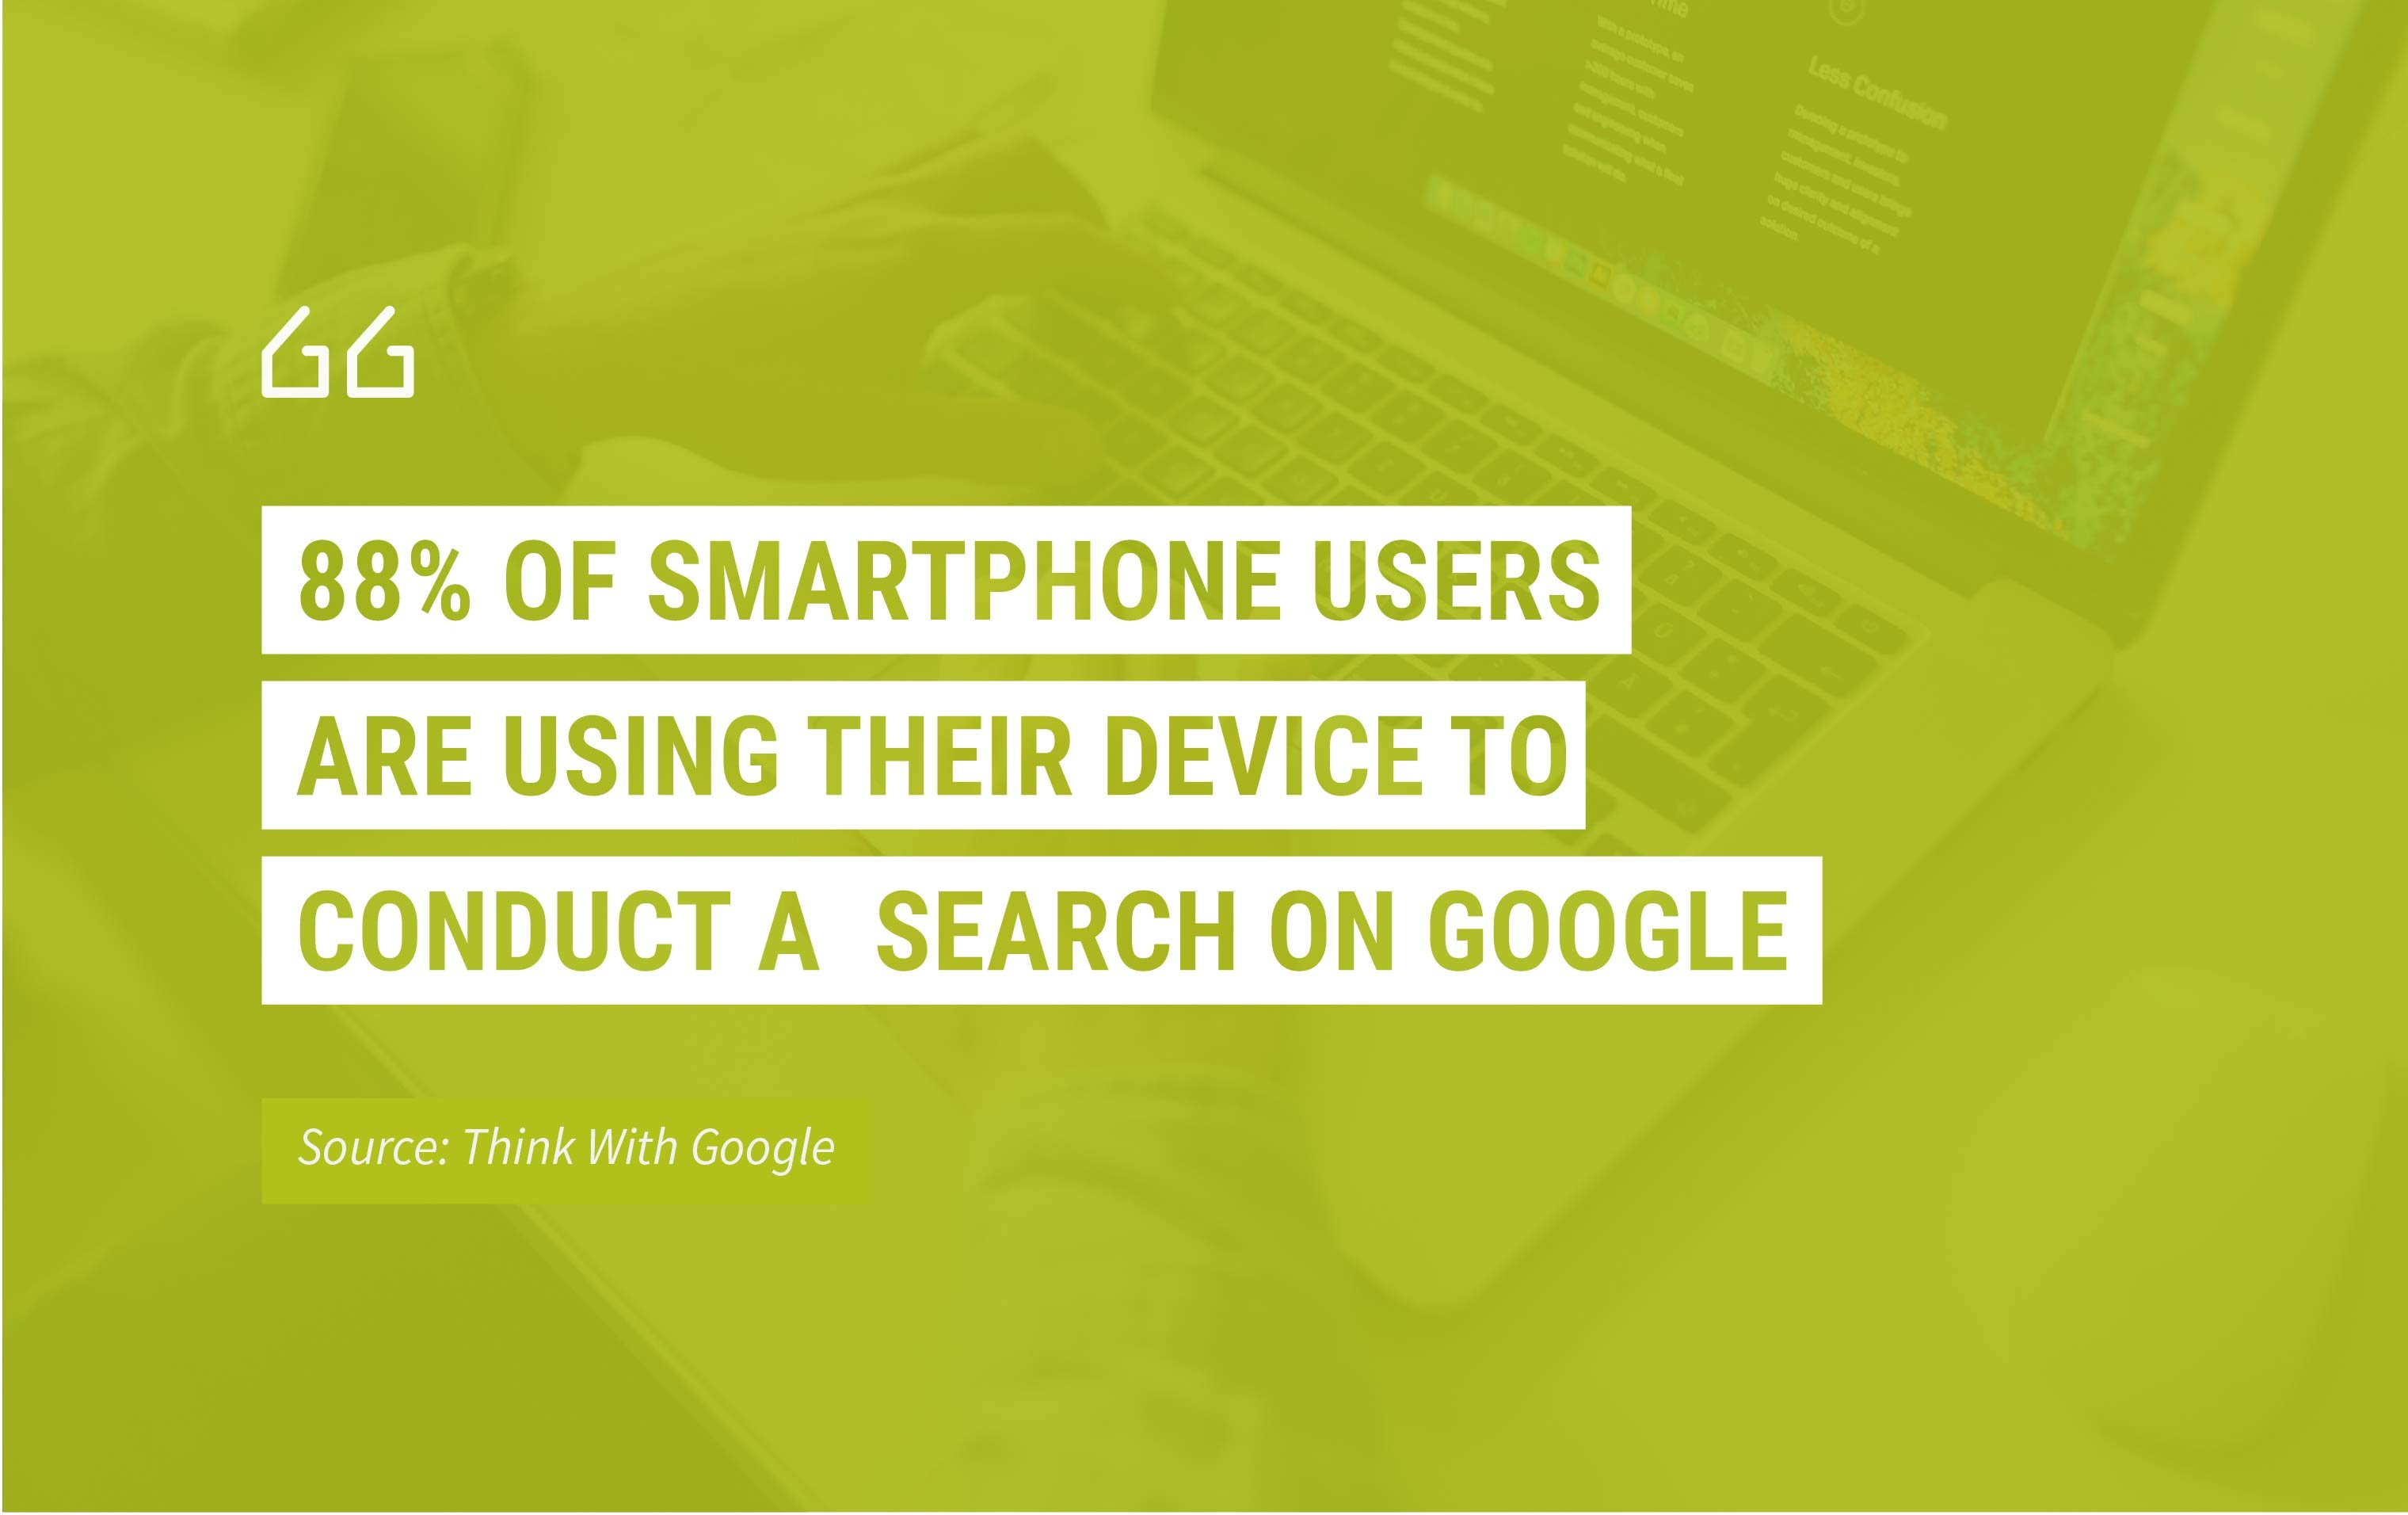 88% of smartphone users are using their devices to conduct searches on Google